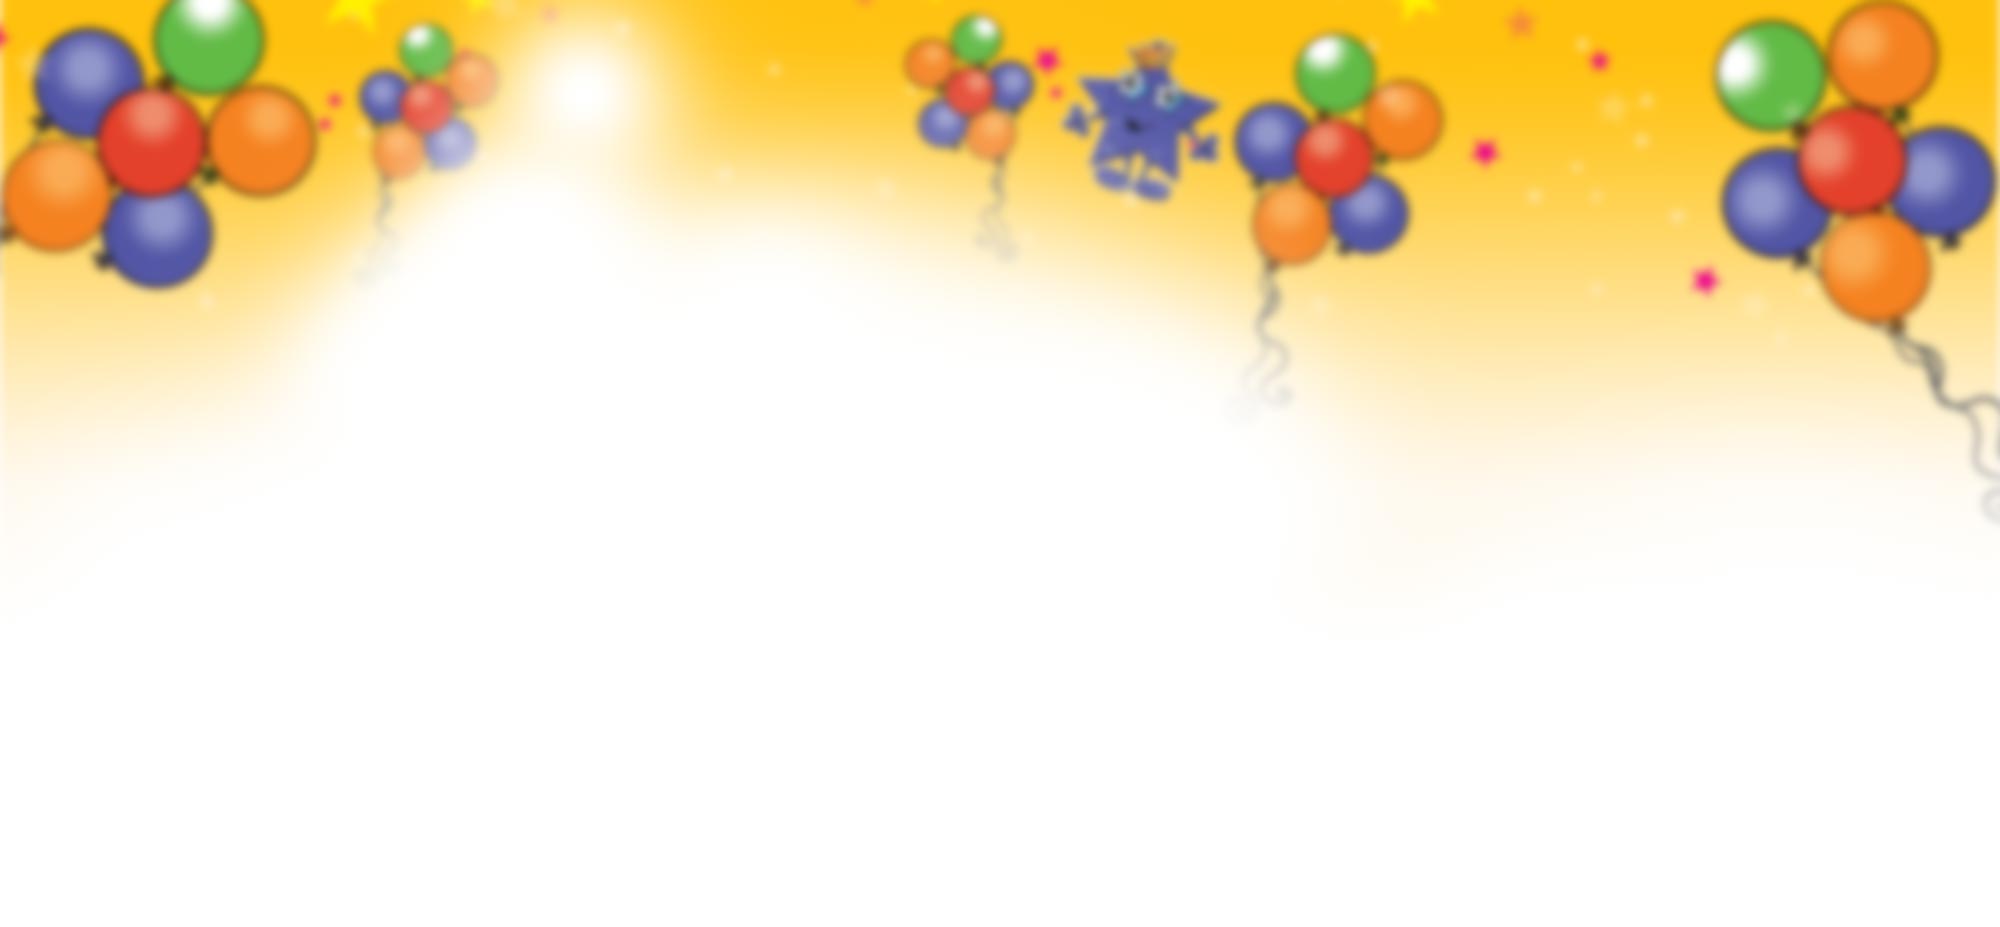 Thumb Image - Birthday Party Theme Background - 2000x927 Wallpaper -  